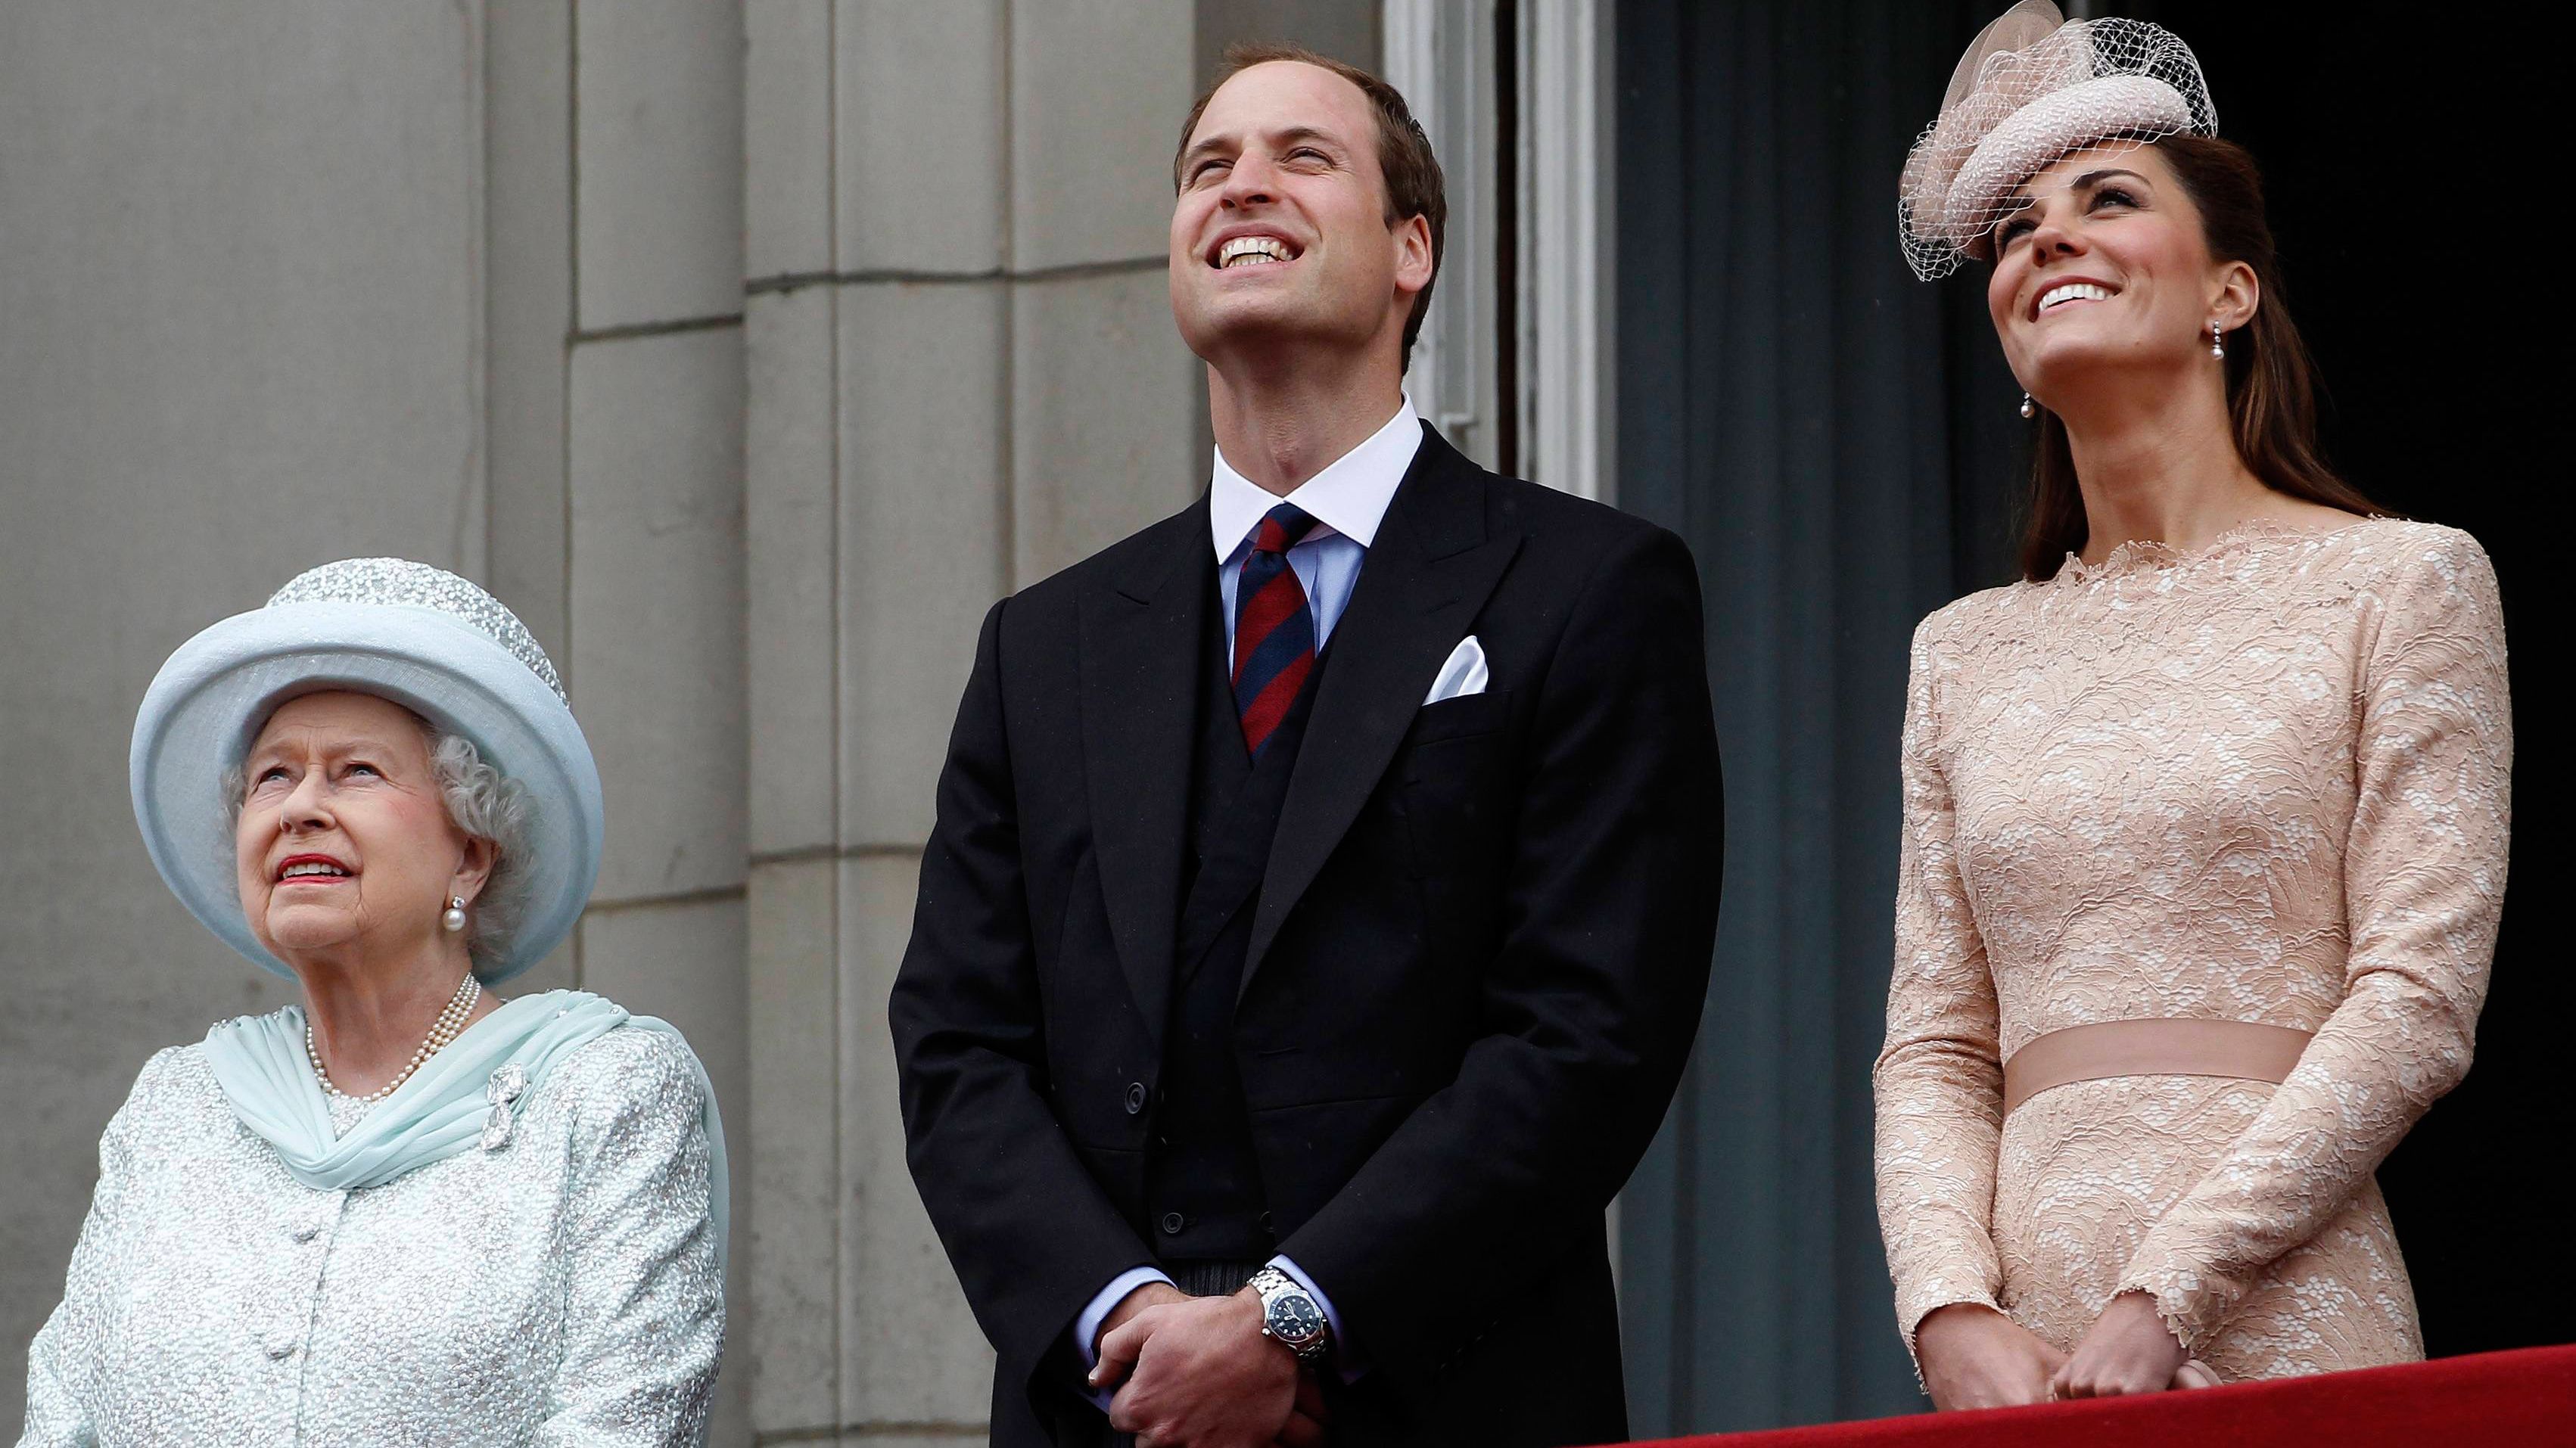 Queen Elizabeth II, William and Catherine stand on the balcony of Buckingham Palace during the Queen's Diamond Jubilee celebrations in June 2012.